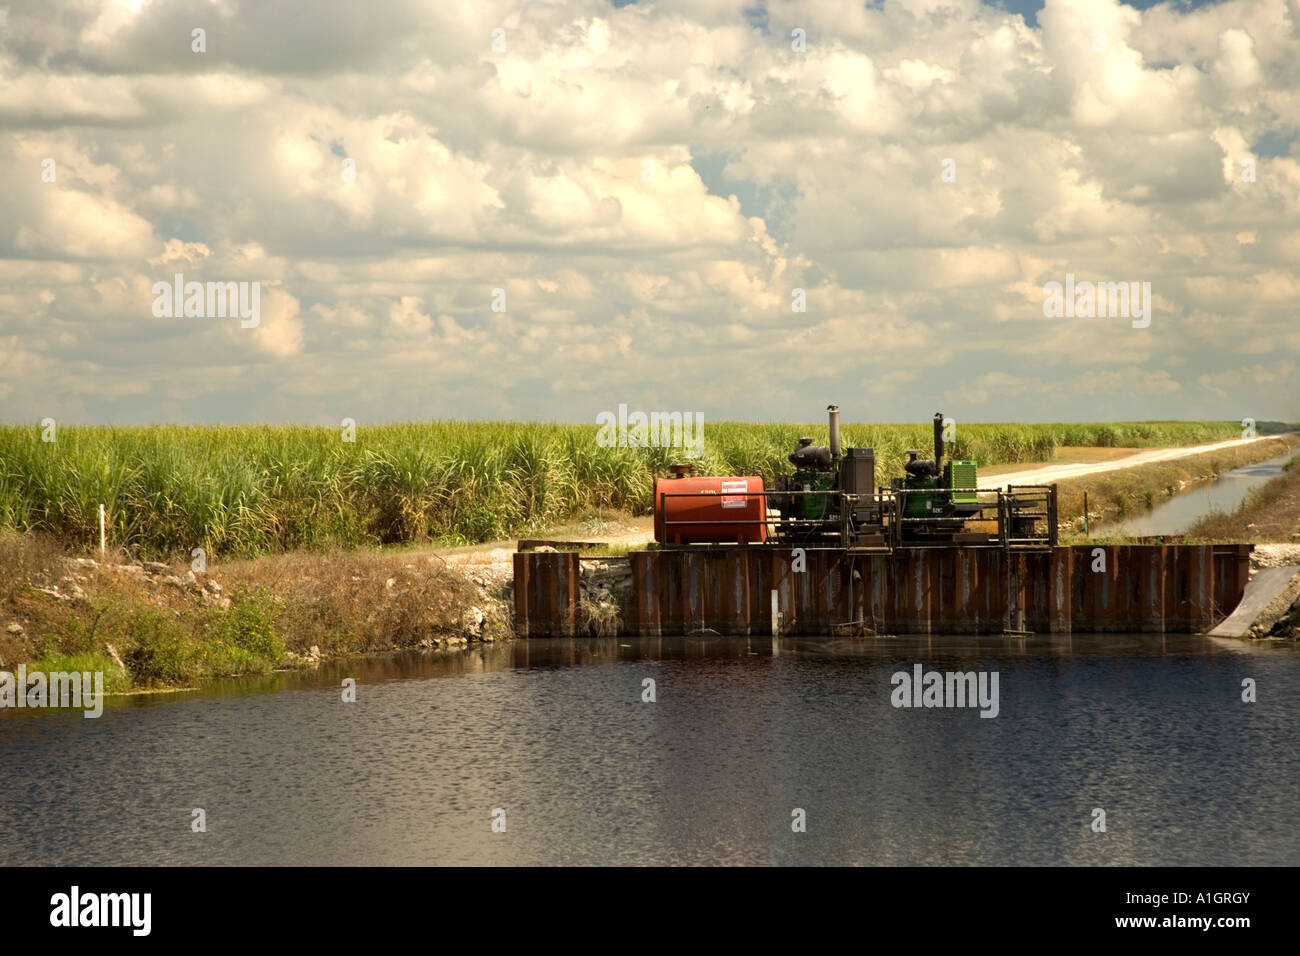 Irrigation canal by sugar cane field, Stock Photo